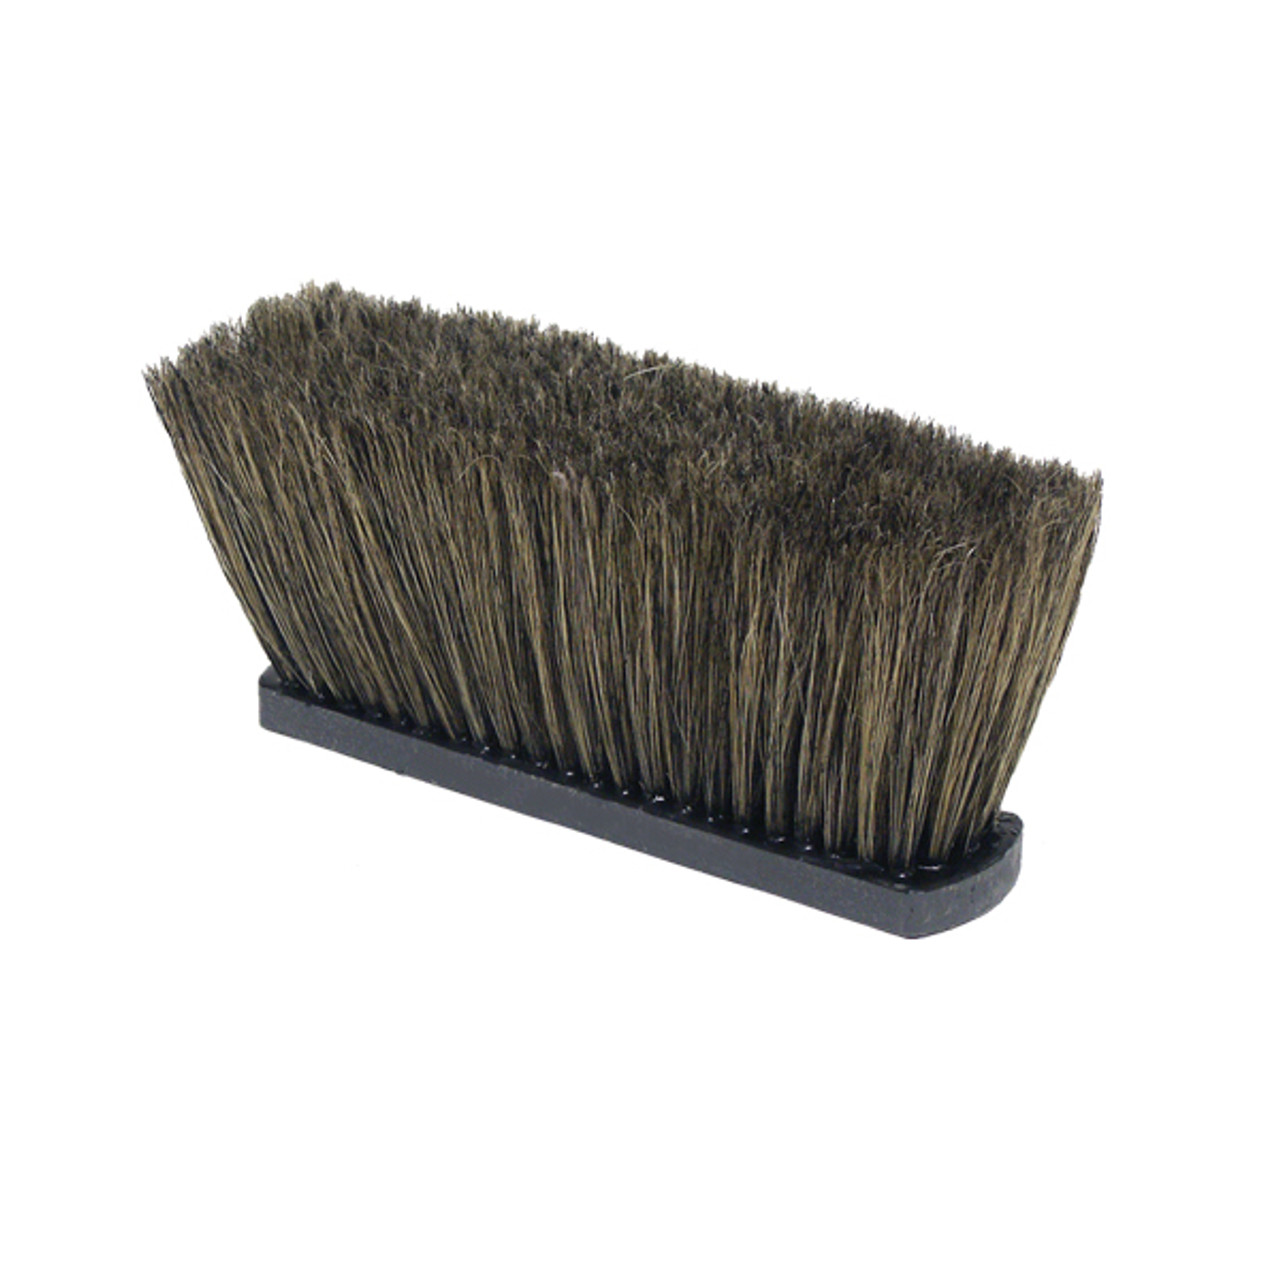 Hog Bristle and Plastic Handle Parts Cleaning Brush